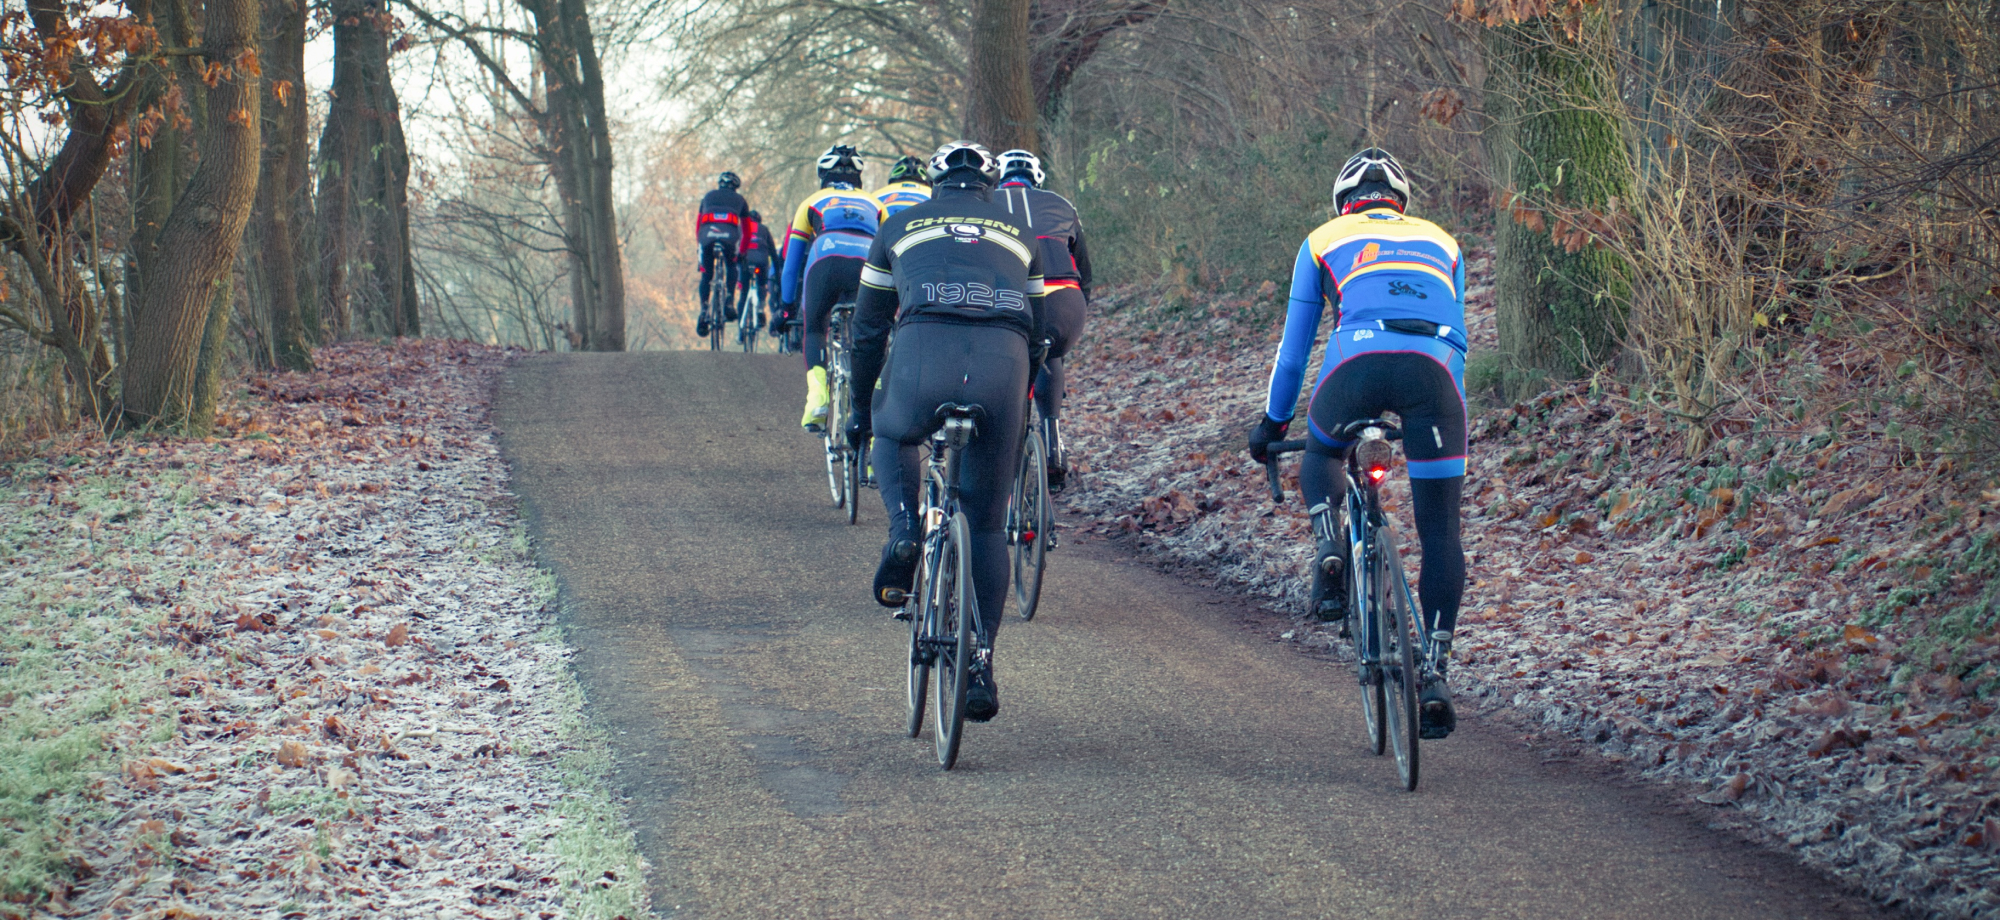 Group of cyclists from behind